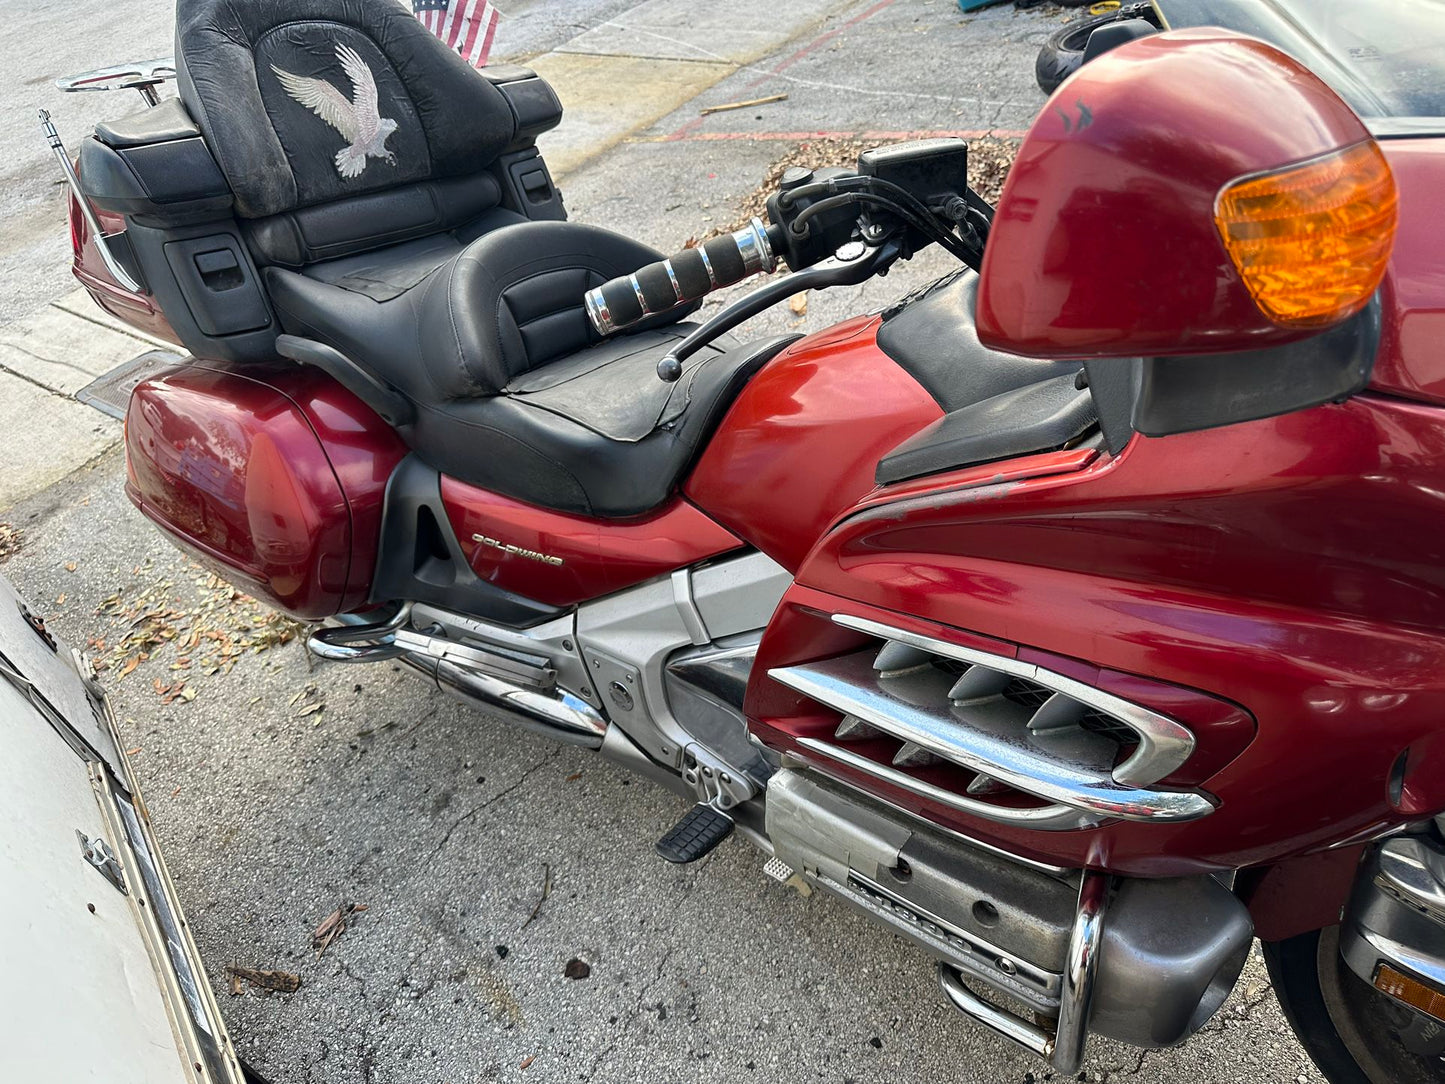 01 Honda Goldwing 1800 GL1800 65,000 miles Contact For Pricing GL